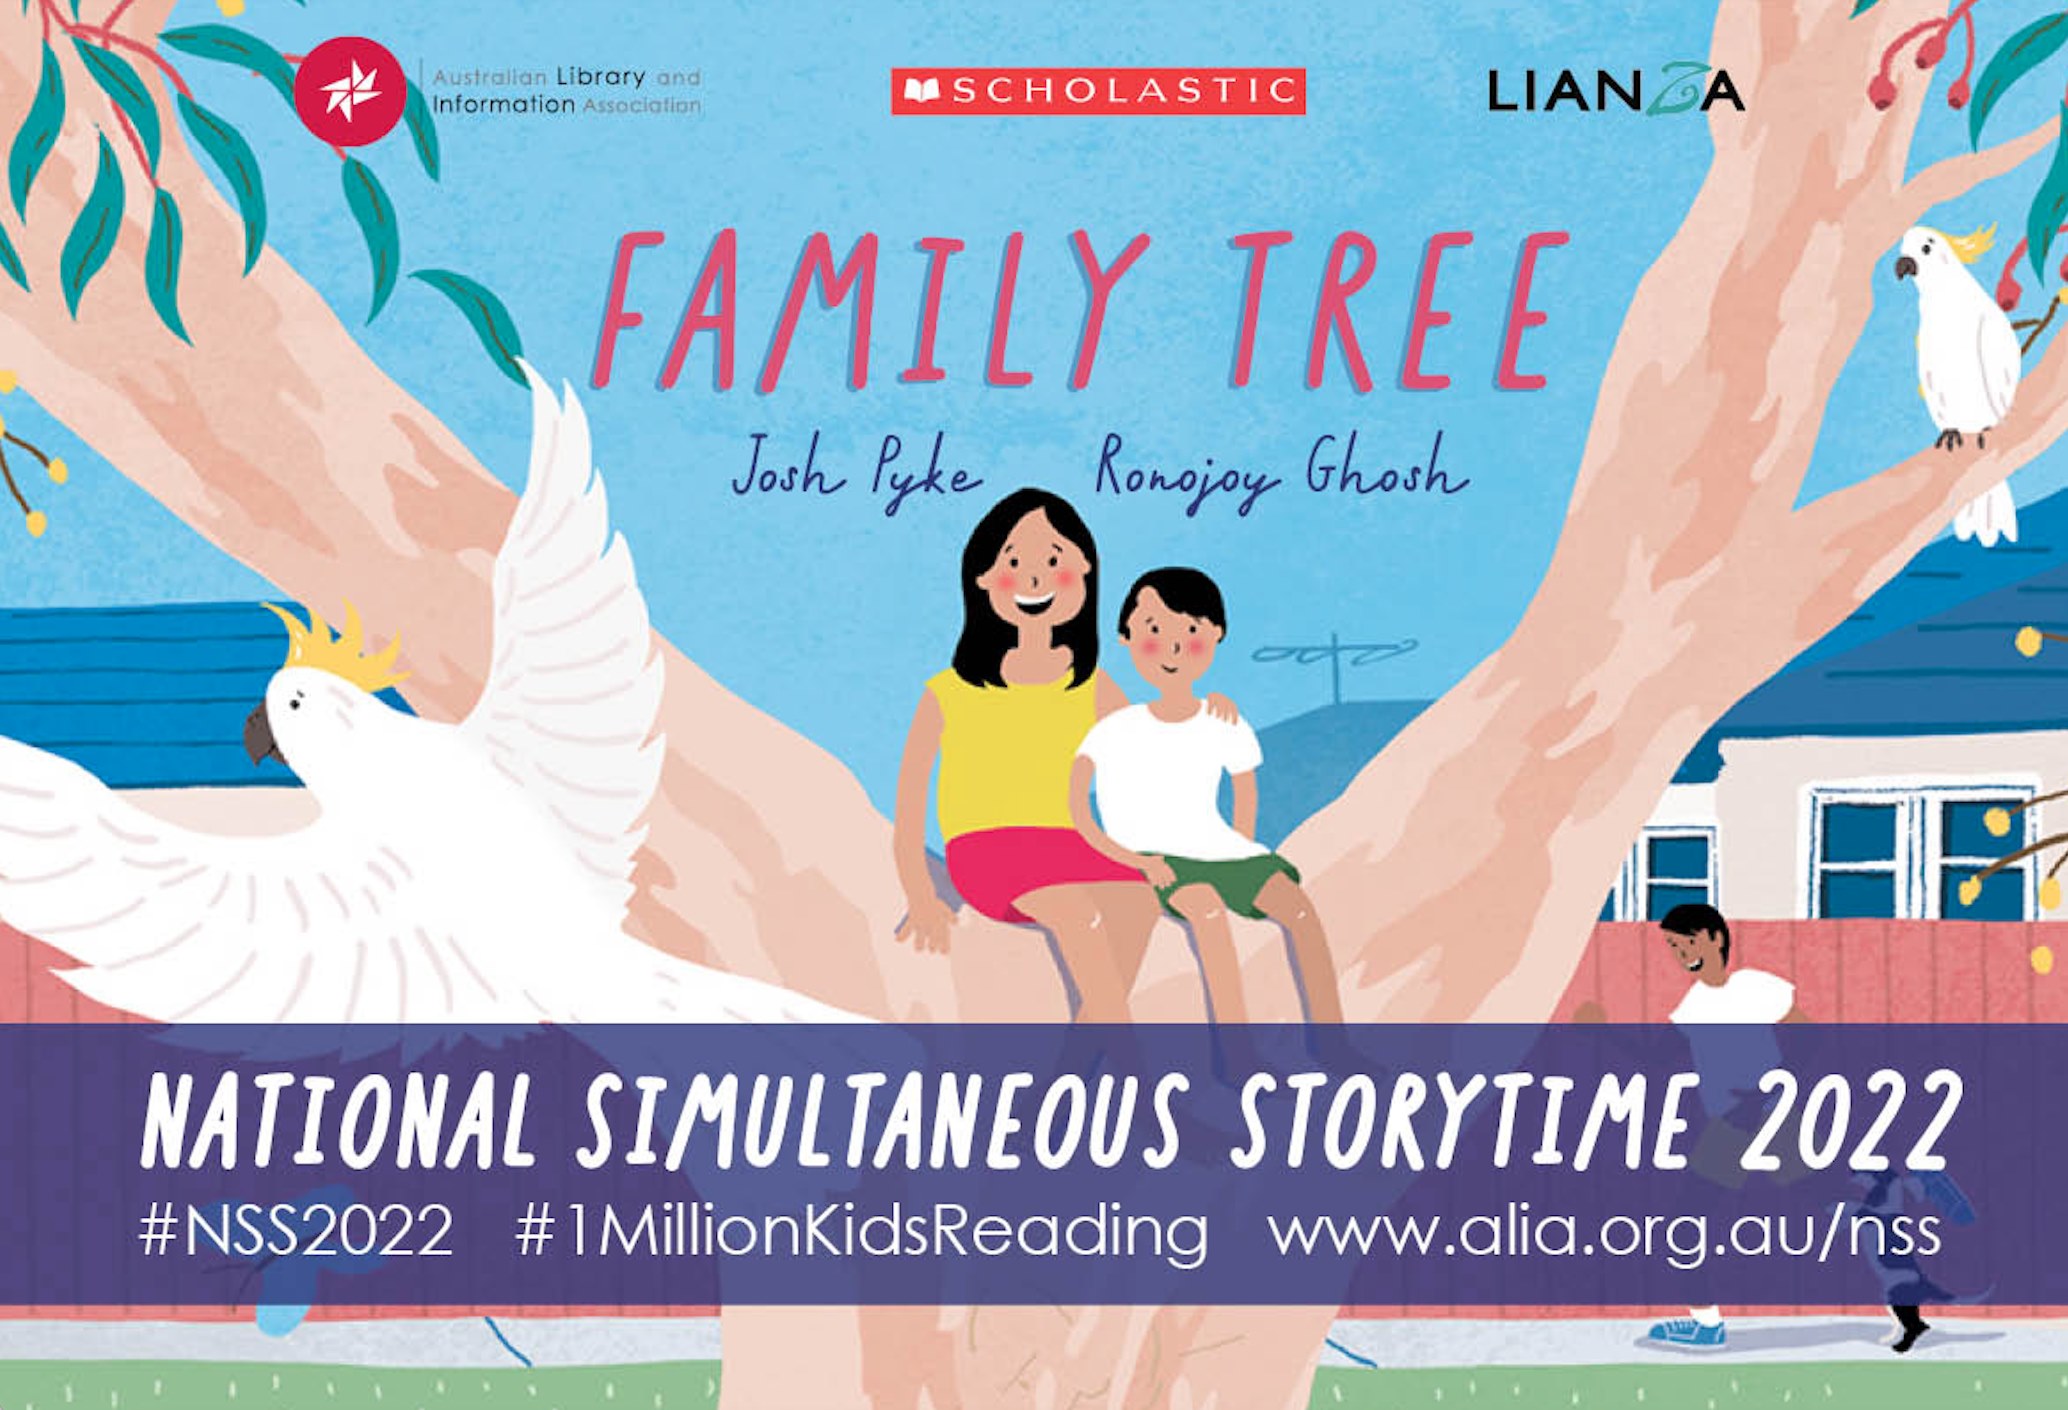 NationalSimultaneousStorytime2022.jfif